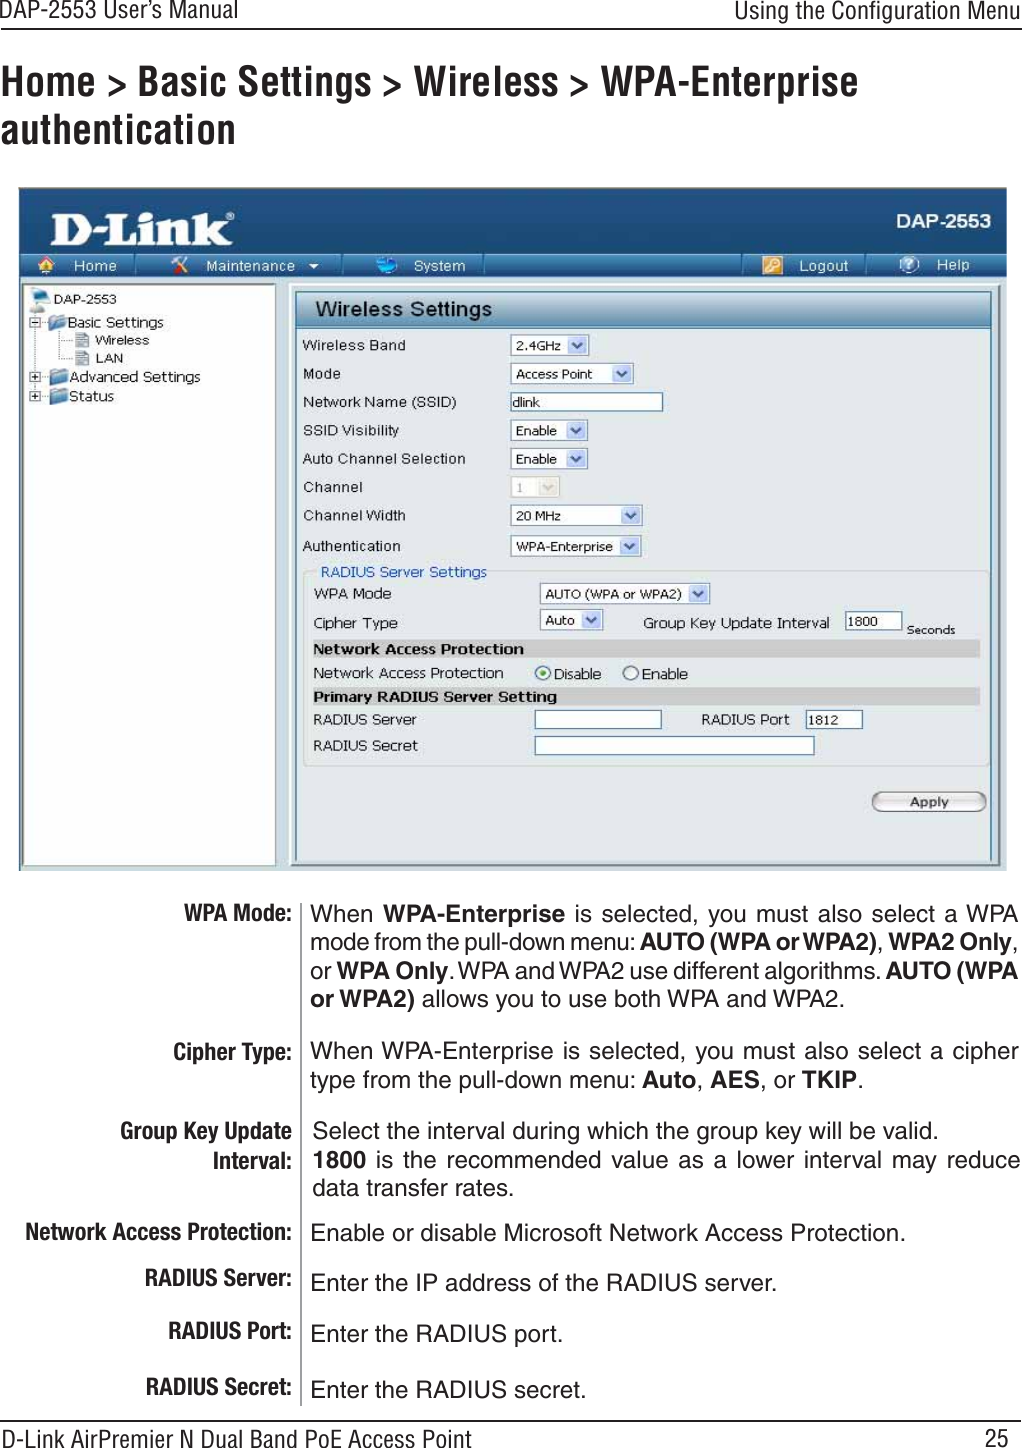 25DAP-2553 User’s ManualD-Link AirPremier N Dual Band PoE Access PointHome &gt; Basic Settings &gt; Wireless &gt; WPA-Enterprise authenticationCipher Type: Group Key Update Interval: When WPA-Enterprise is selected, you must also select a ciphertype from the pull-down menu: Auto,AES,orTKIP.Select the interval during which the group key will be valid.1800 is the recommended value as a lower interval may reducedata transfer rates.Using the Conﬁguration MenuWhen WPA-Enterprise is selected, you must also select a WPAmode from the pull-down menu: AUTO (WPA or WPA2),WPA2 Only,or WPA Only.WPA and WPA2 use different algorithms. AUTO (WPA or WPA2) allows you to use both WPA and WPA2.WPA Mode: RADIUS Server: Enter the IP address of the RADIUS server.RADIUS Port: Enter the RADIUS port.RADIUS Secret: Enter the RADIUS secret.Enable or disable Microsoft Network Access Protection.Network Access Protection: